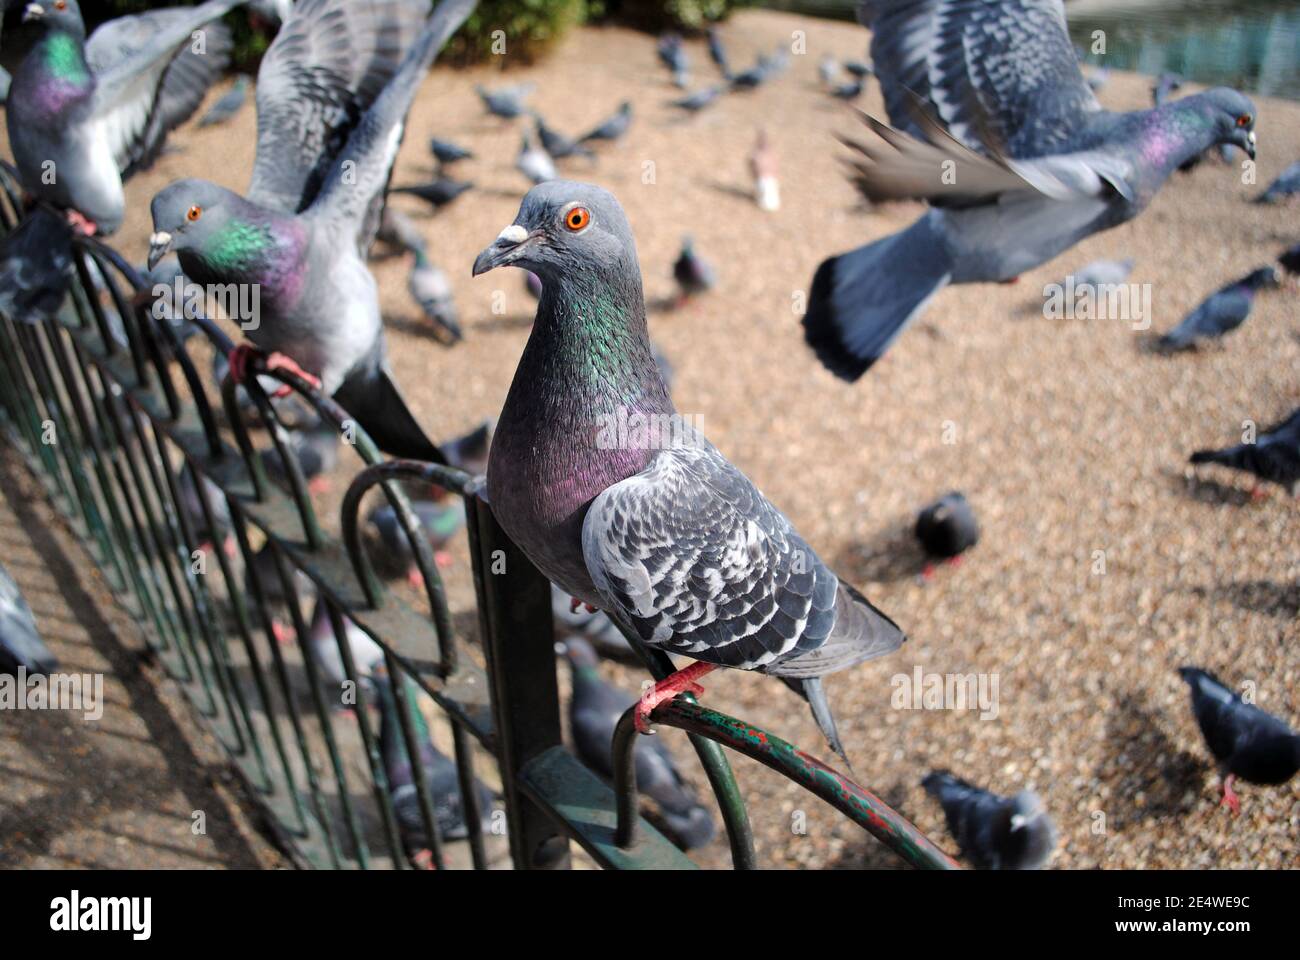 A close-up of a pigeon as part of a flock perched on railings in St James's Park, London, UK. Stock Photo